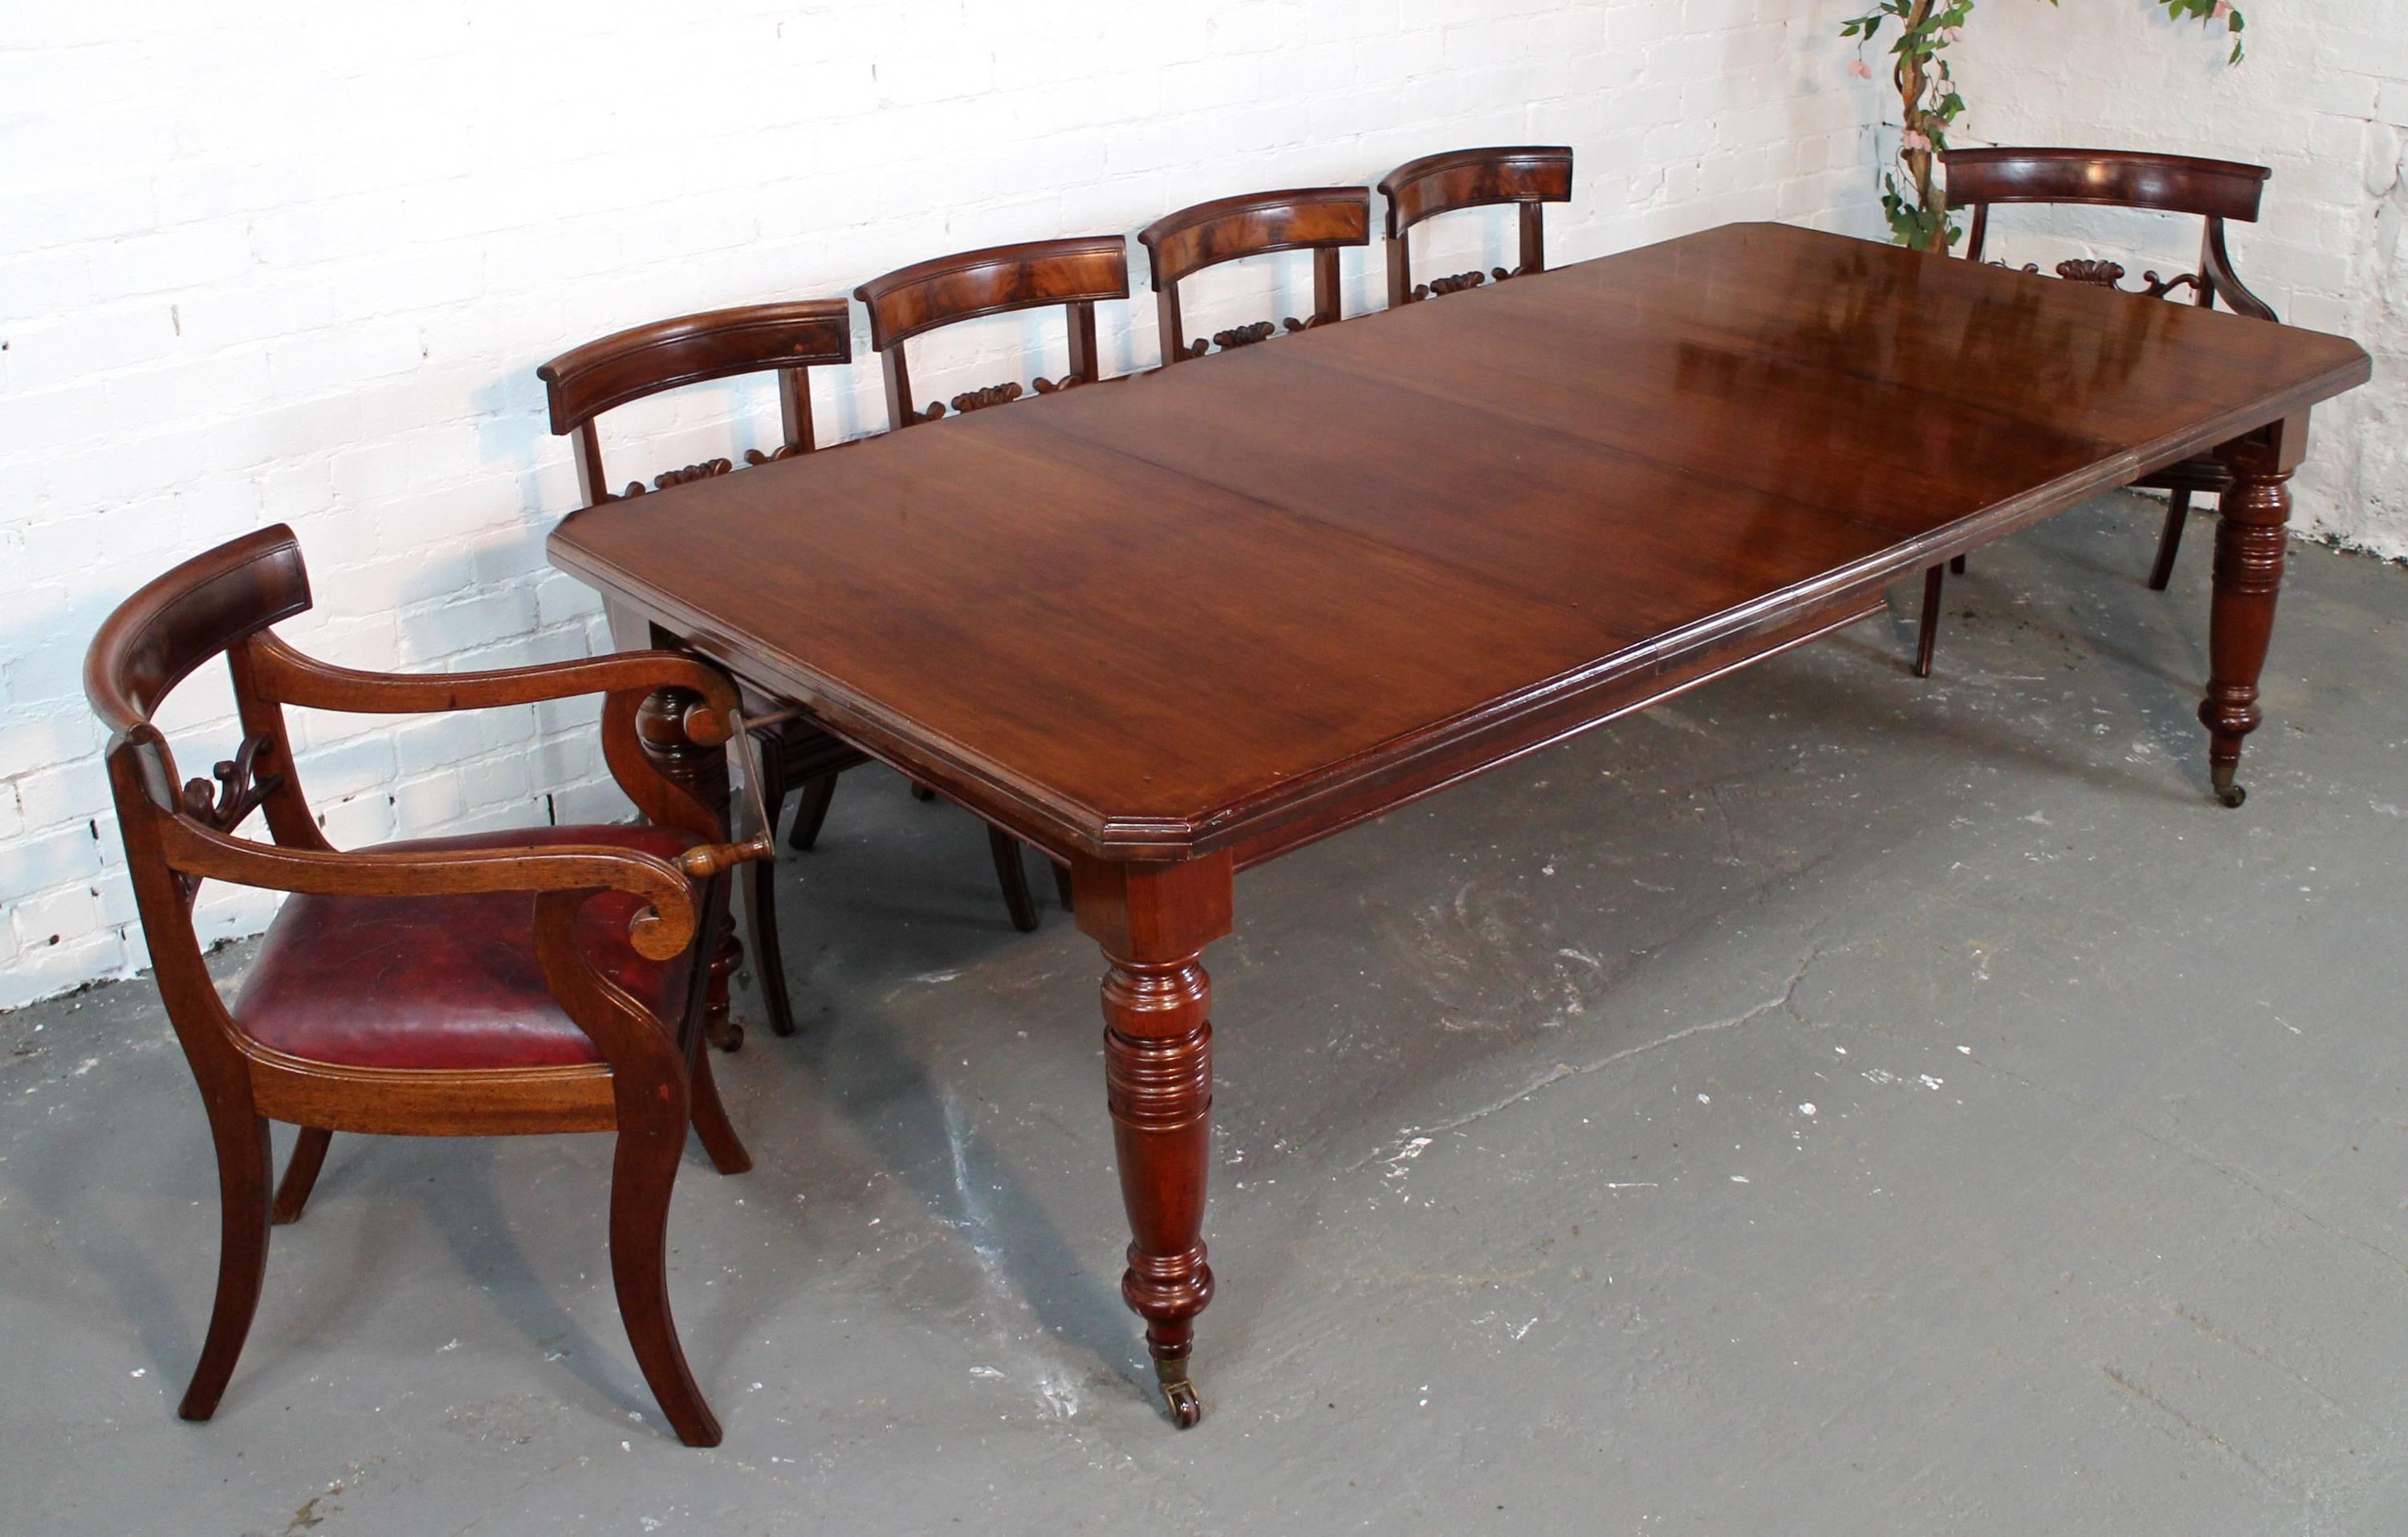 A lovely Victorian extending dining table in mahogany and with two additional leaves. It has a rectangular top with moulded edge and canted corners and stands on four ring turned legs with brass caps and brown pottery castors. The table smoothly